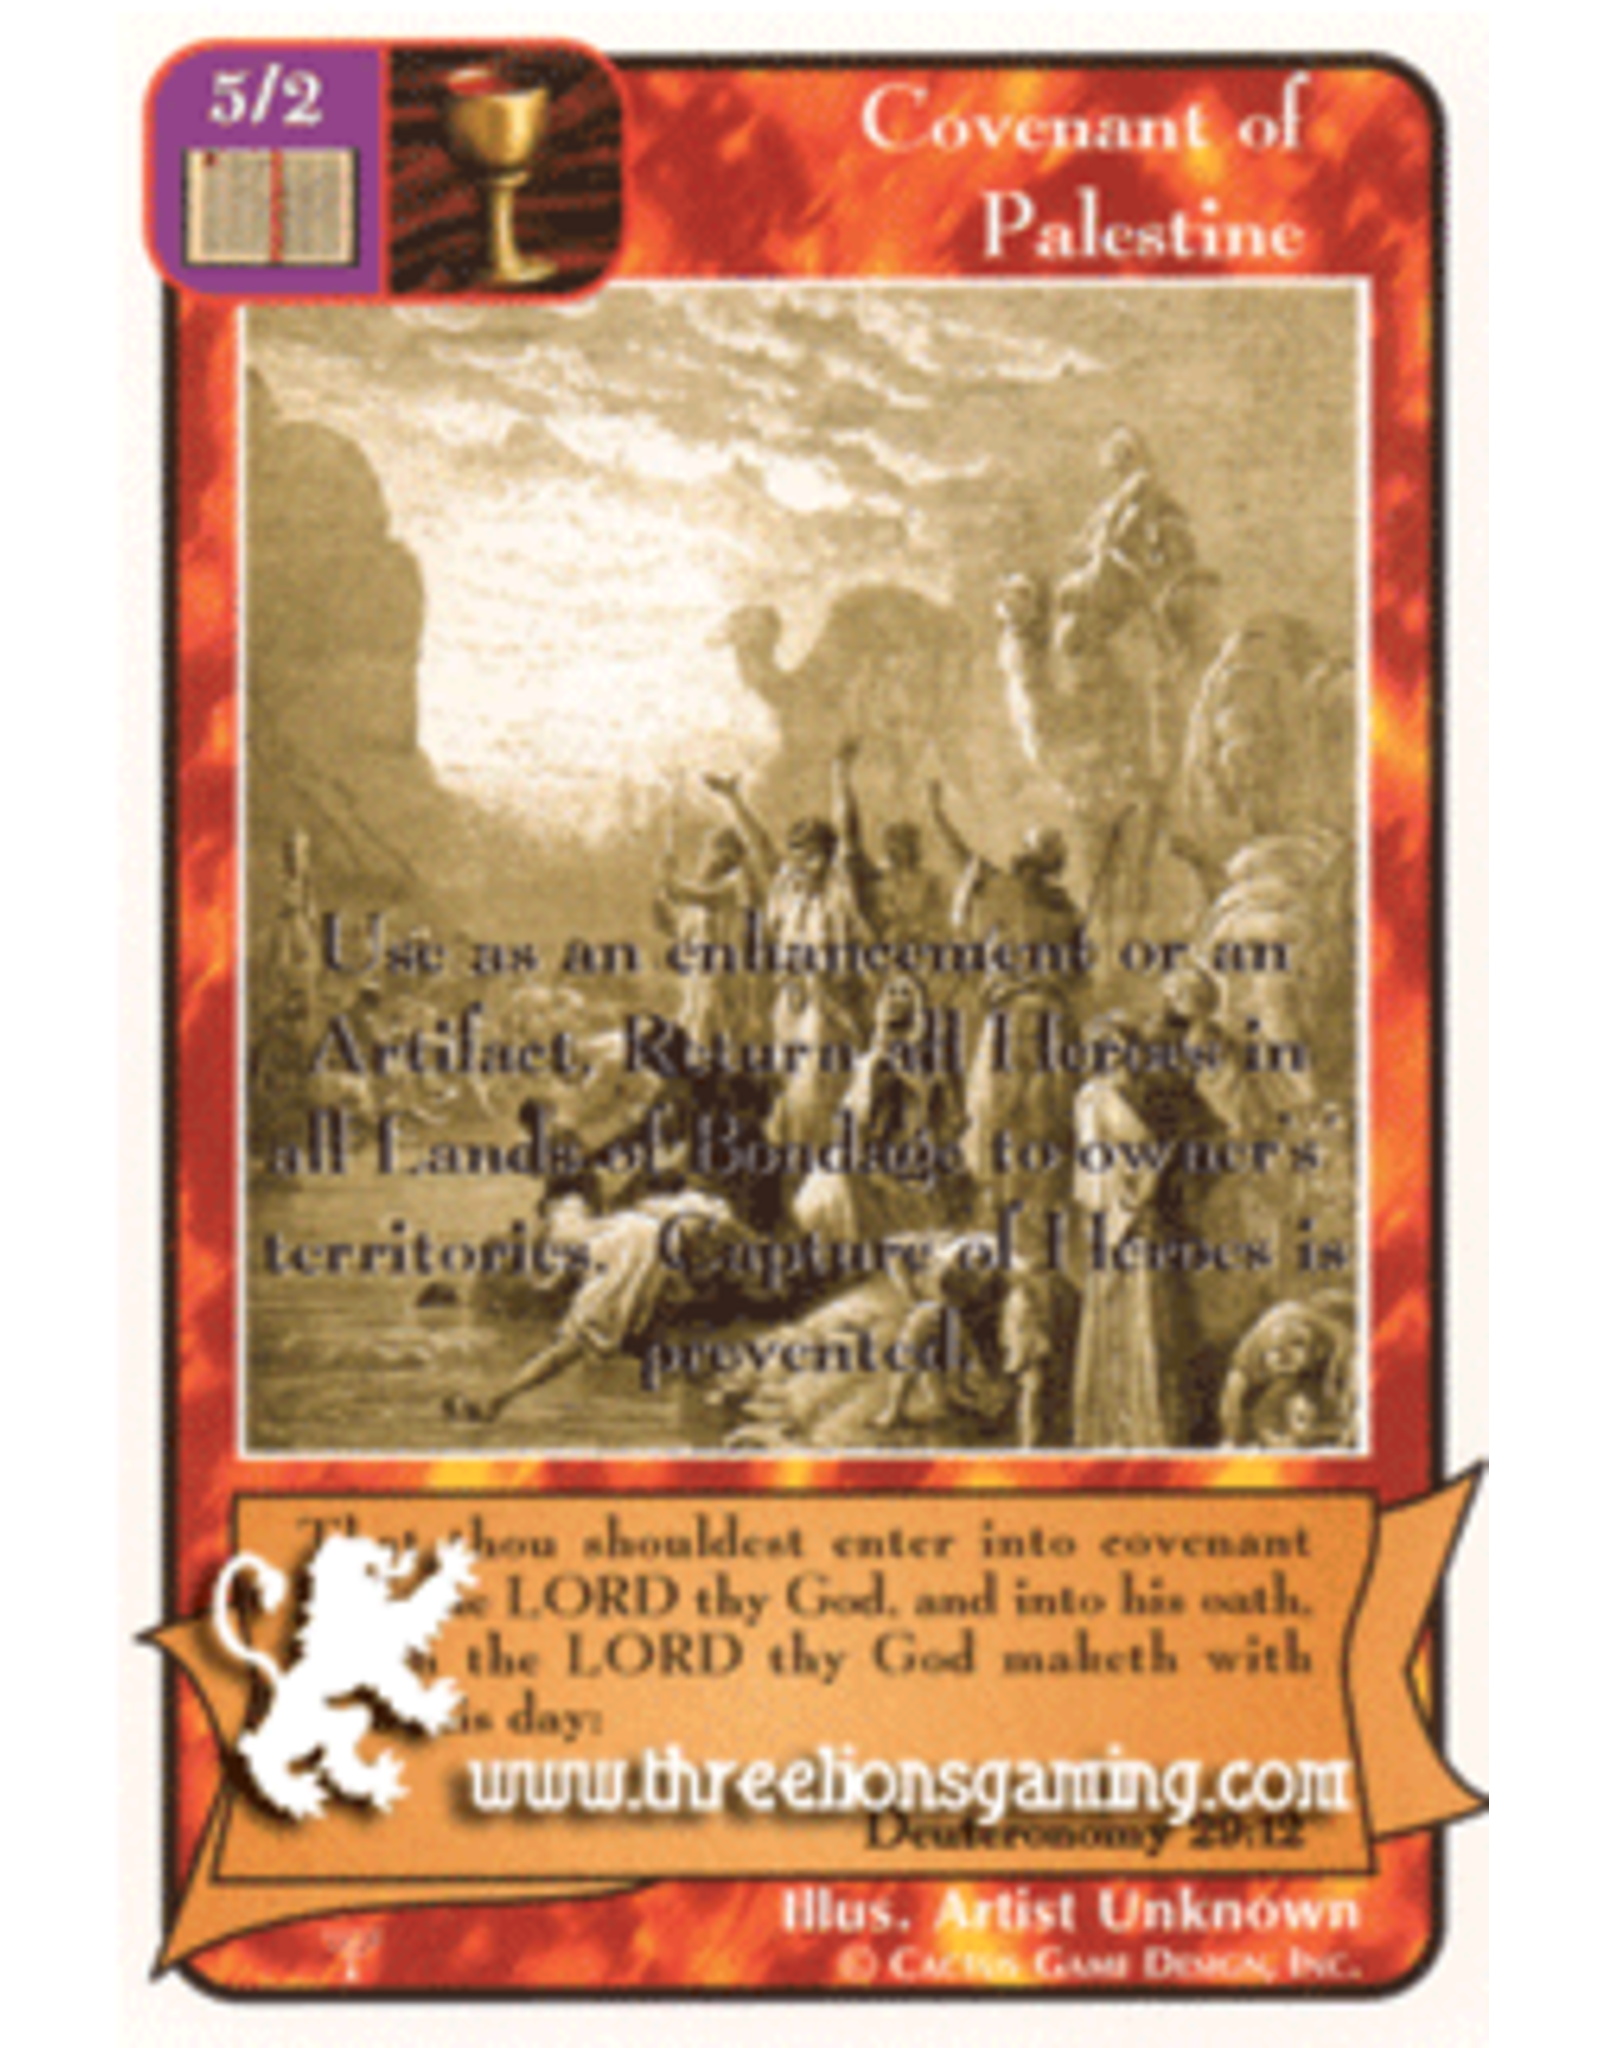 Pa: Covenant of Palestine